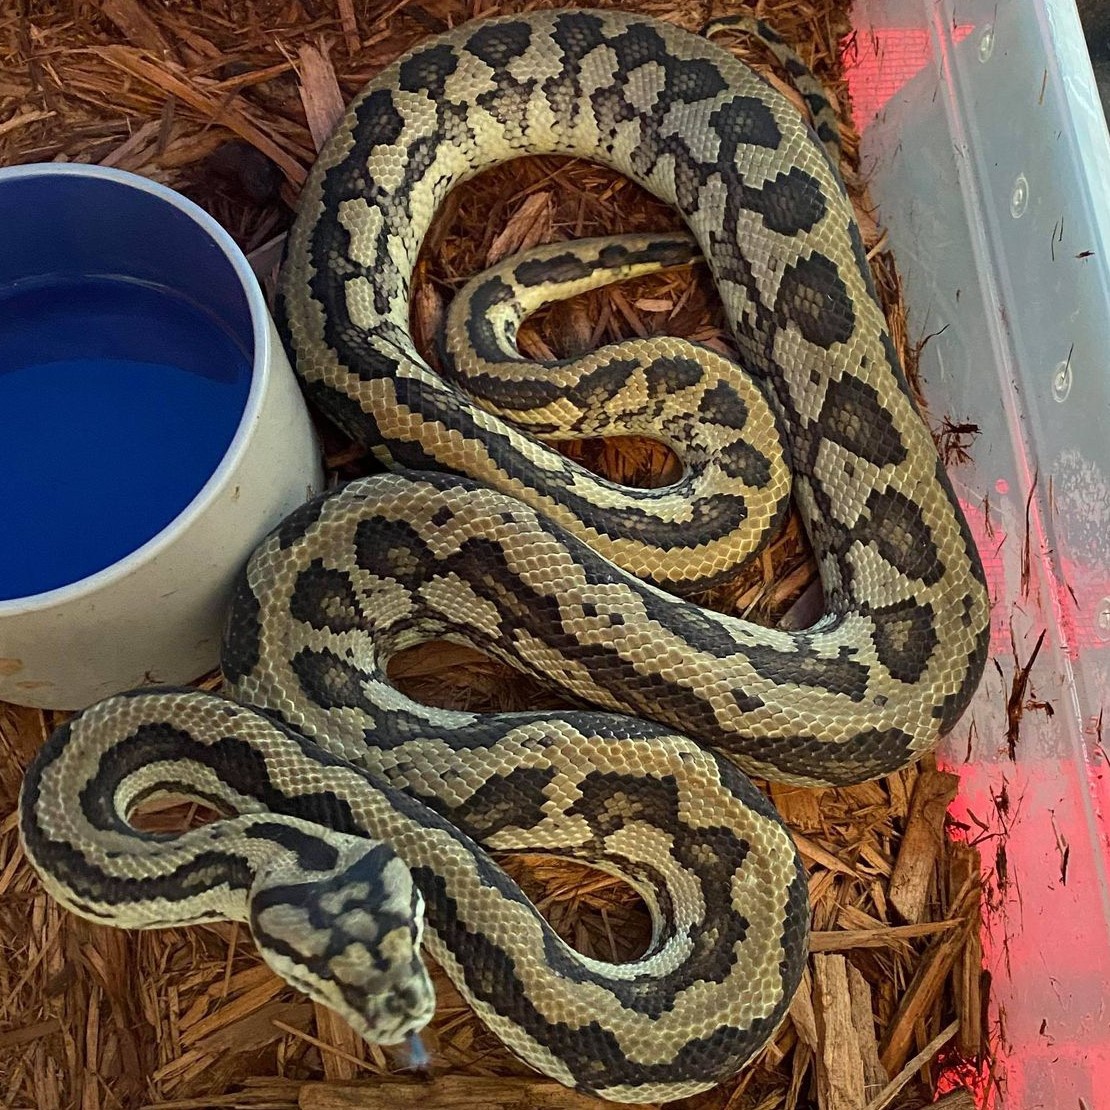 Citrus Tiger Other Carpet Python by Extraordinary Ectotherms